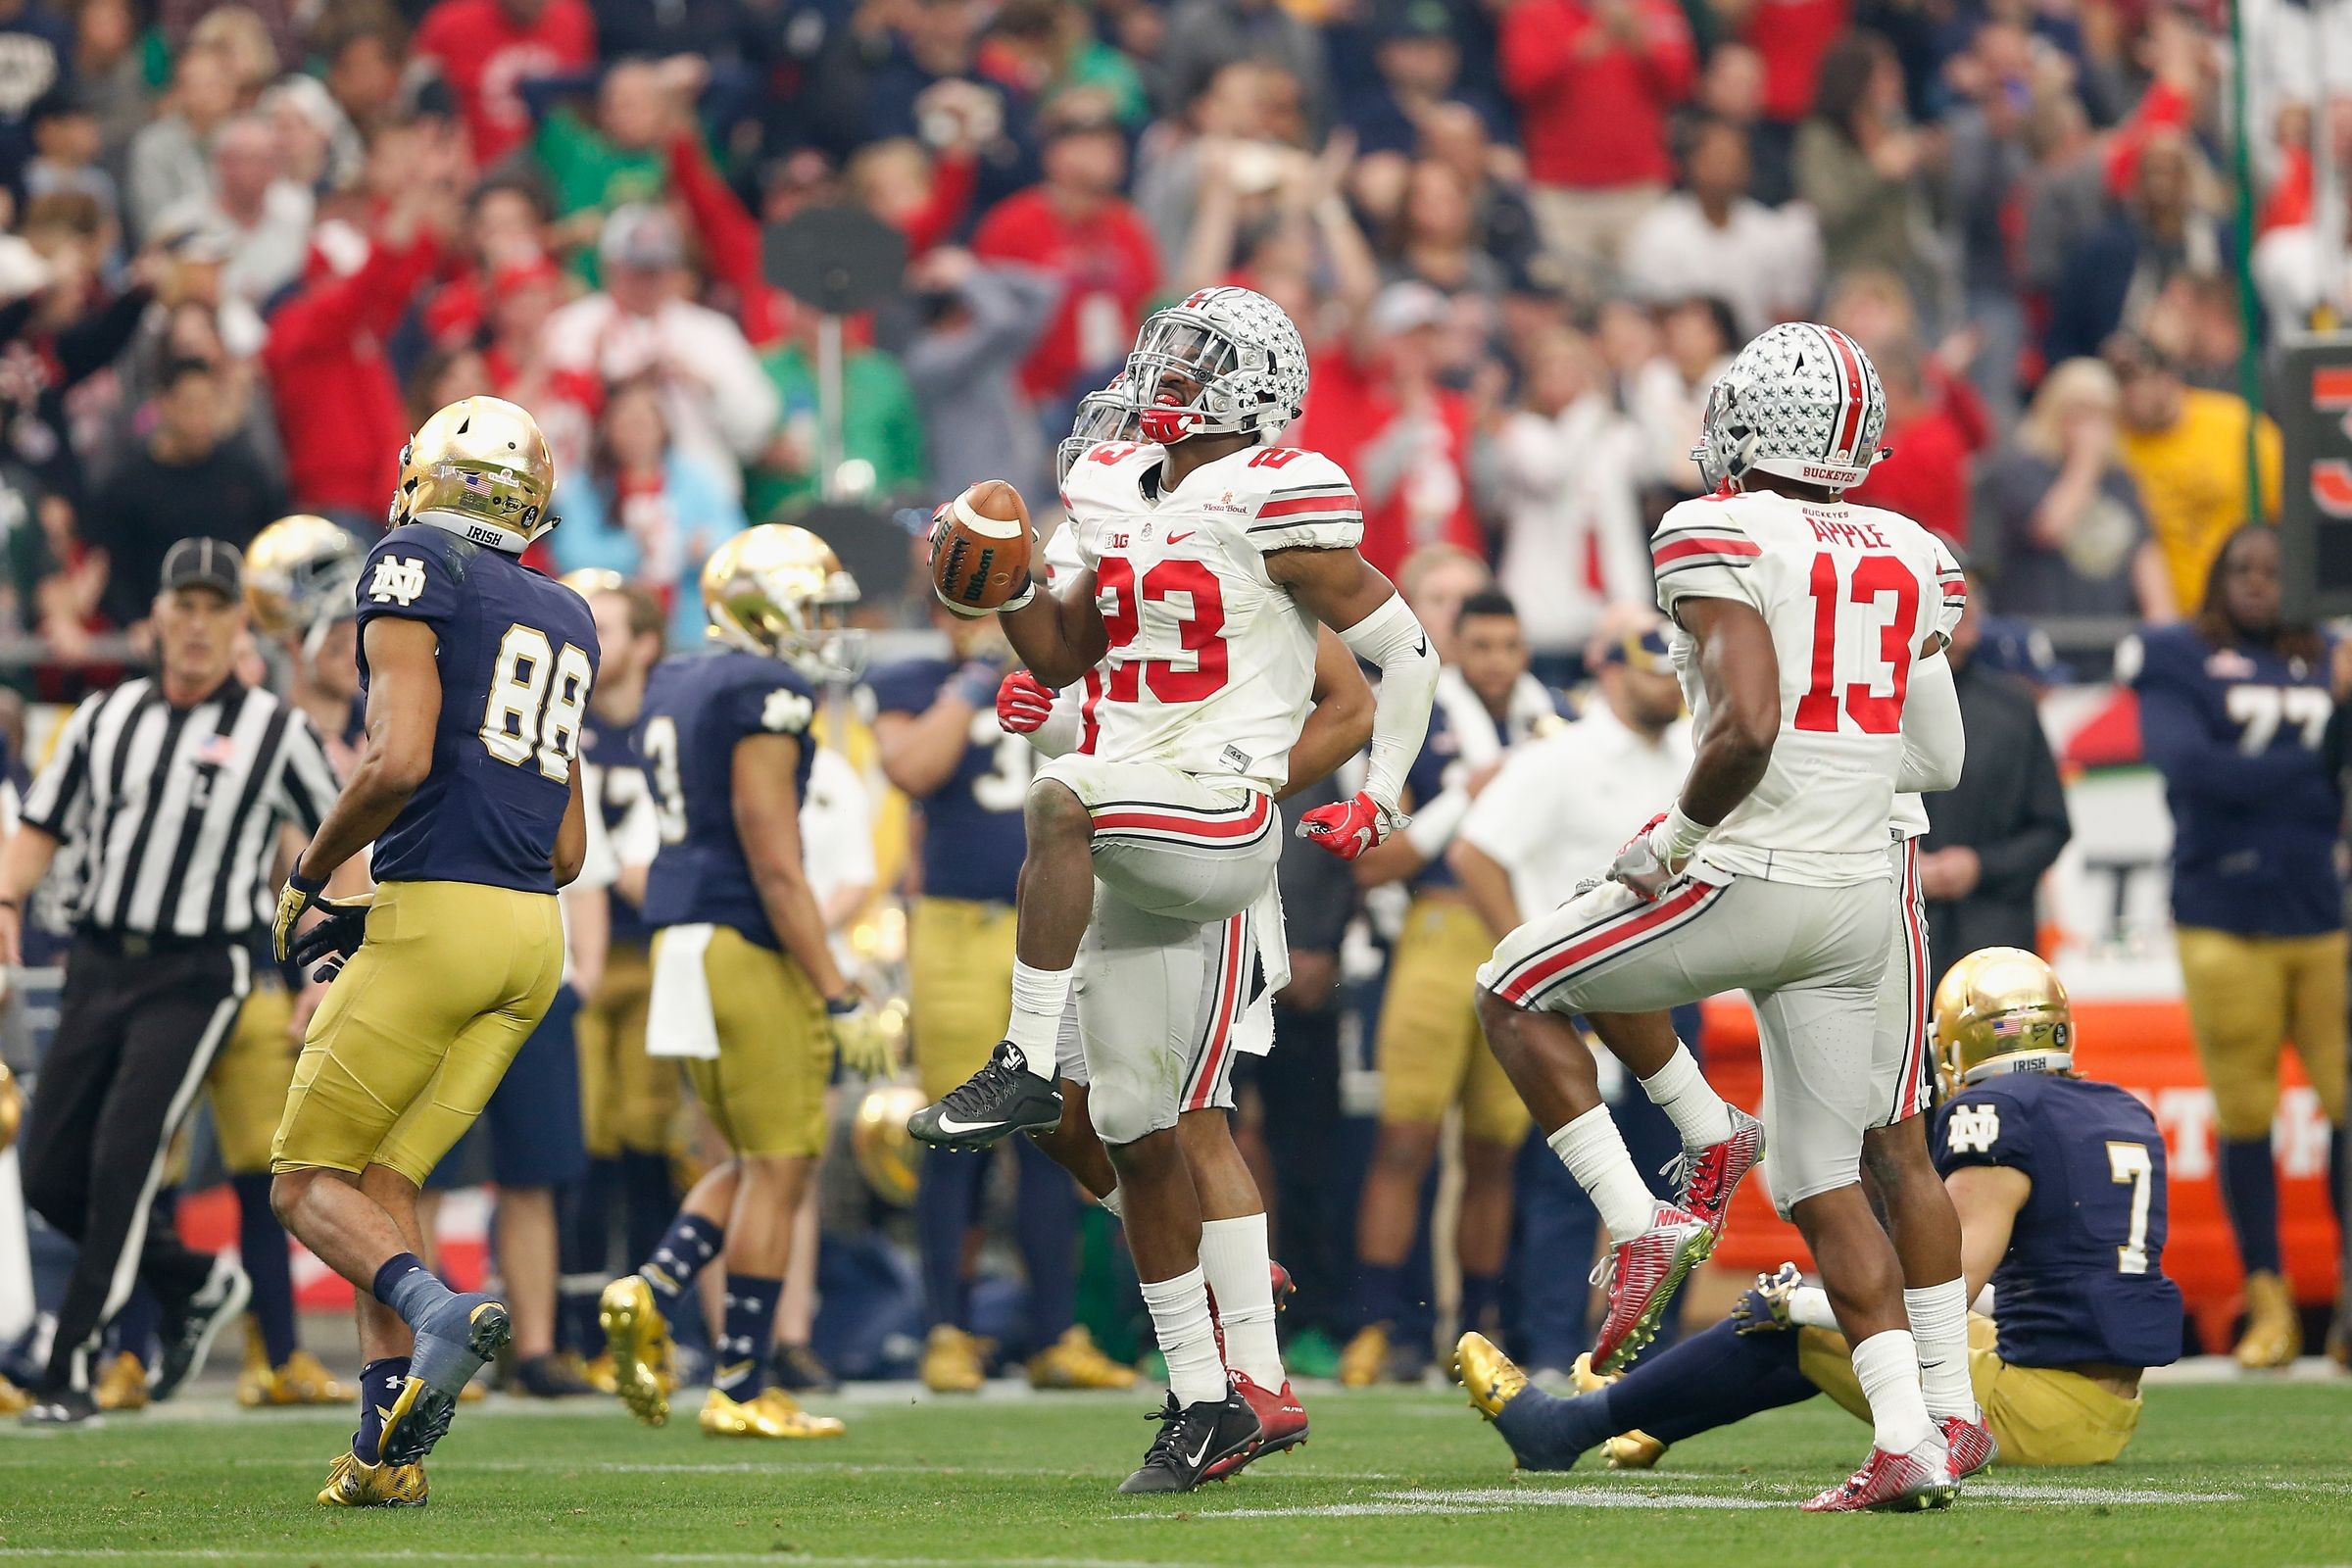 Ohio State beat Notre Dame again with talent, culture, and scheme